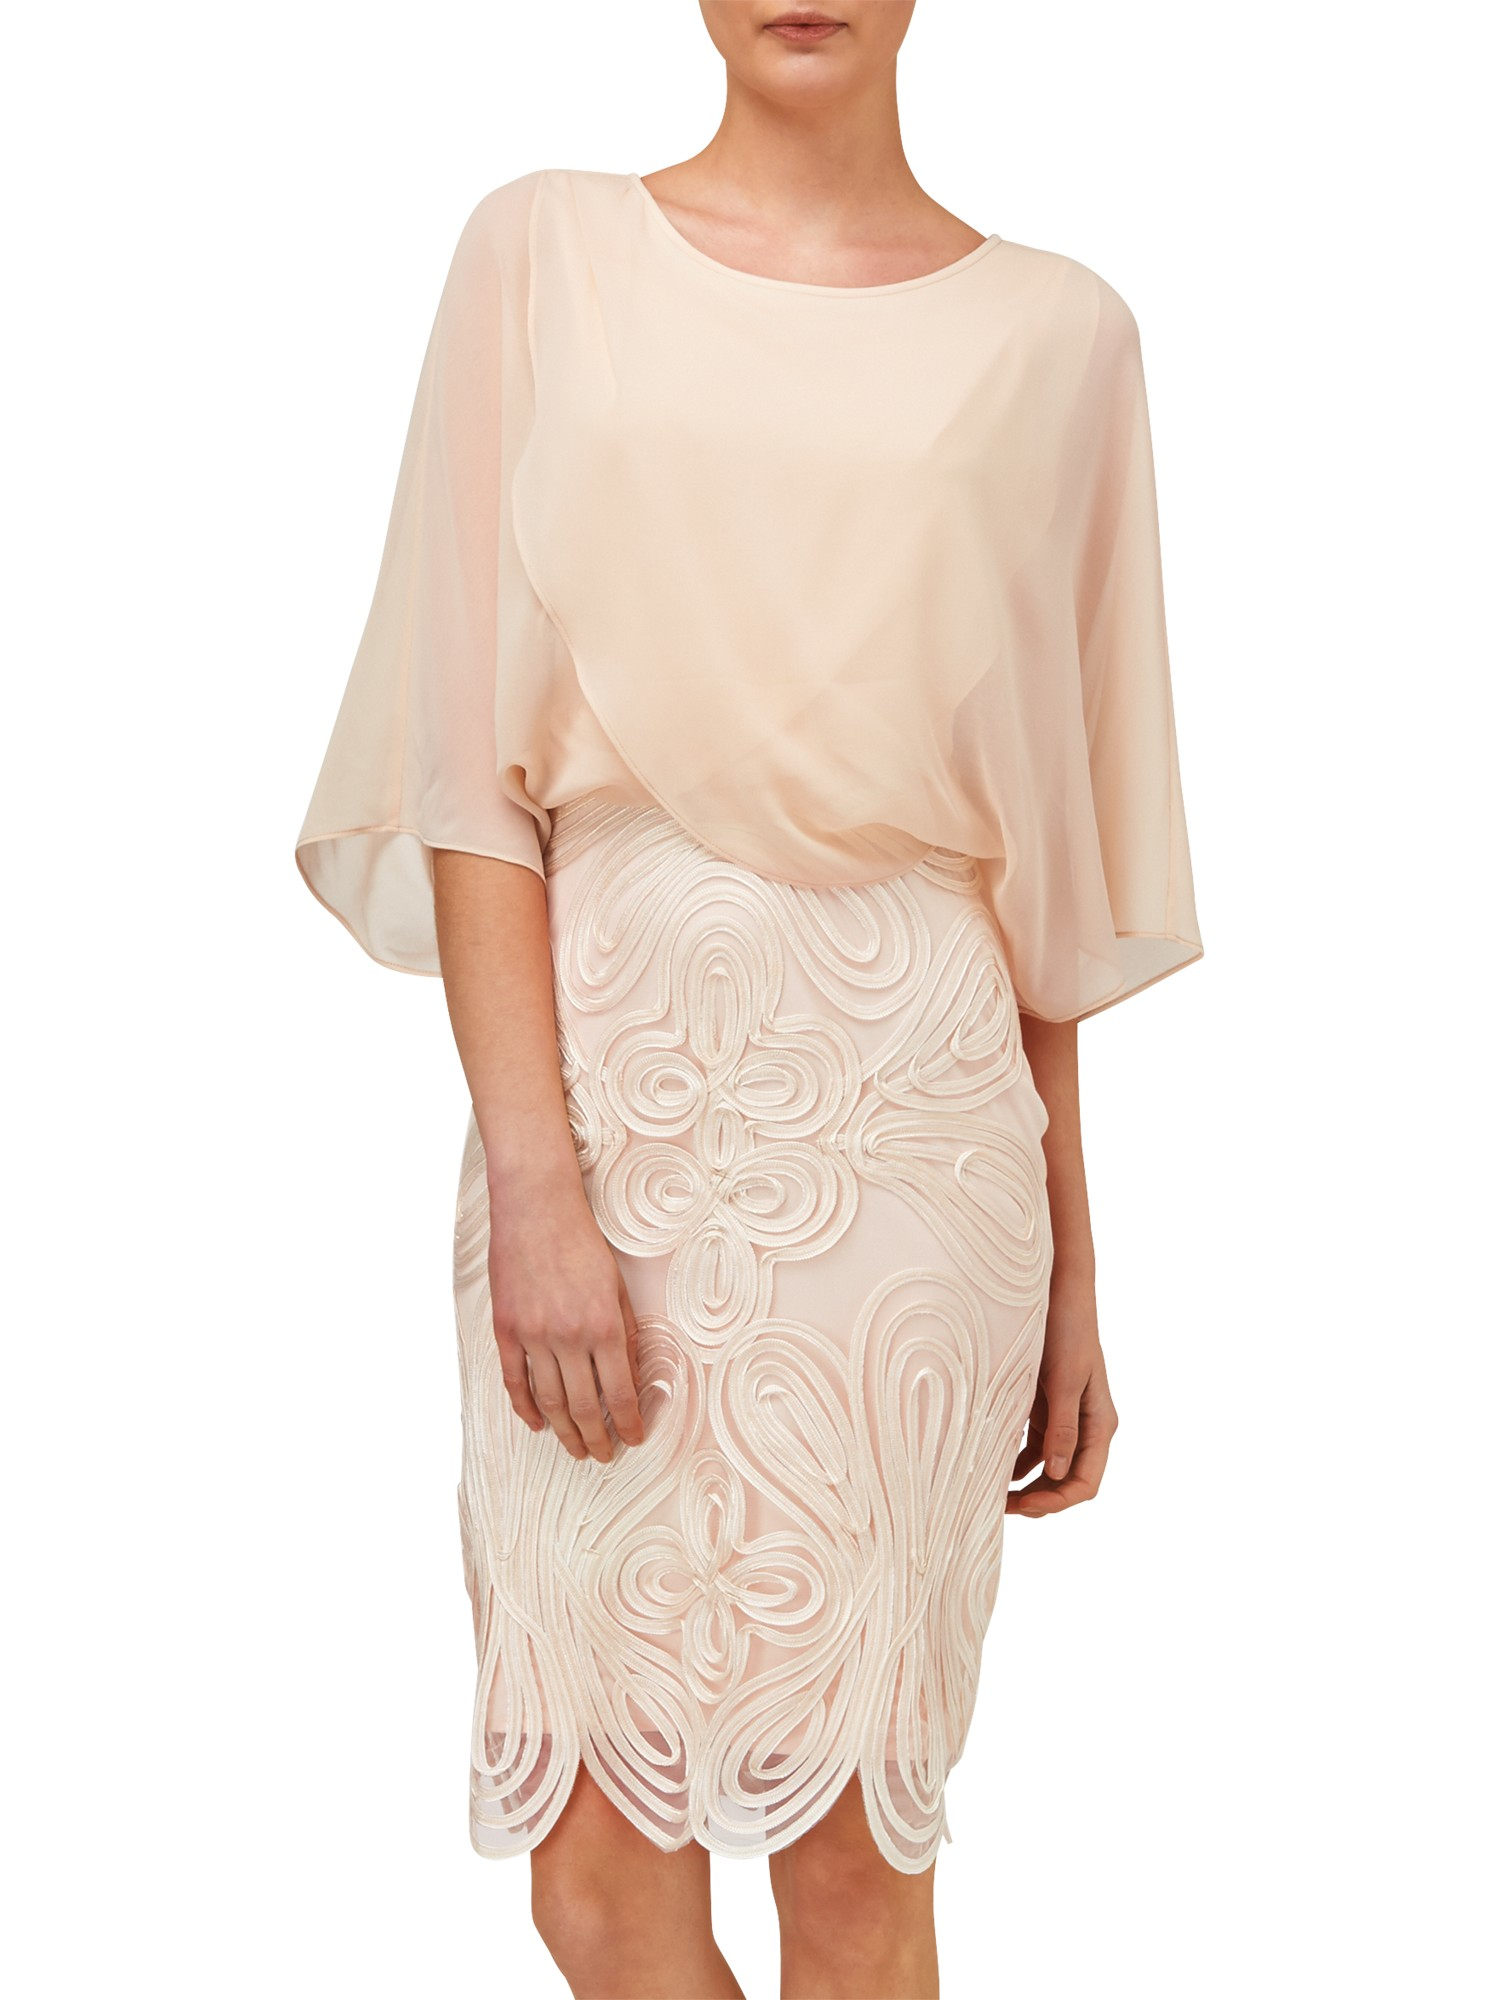 Phase Eight Chiffon Laura Dress in Cream (Natural) - Lyst